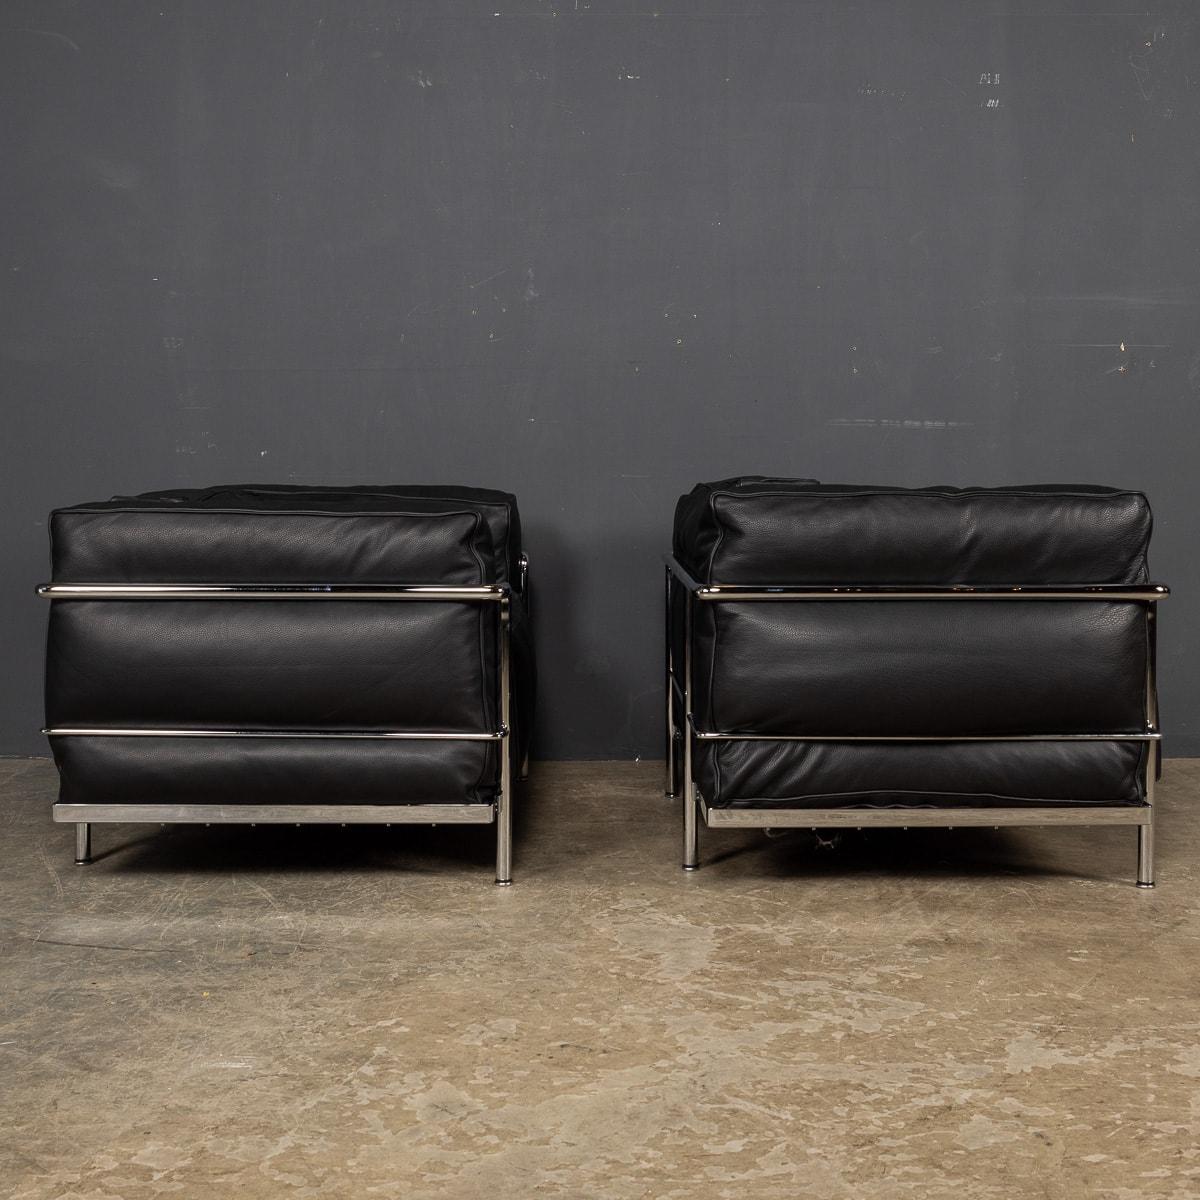 3 Fauteuil Grand Confort, Grand Modele, Durable Cassina-Sessel. Le Corbusier (Metall) im Angebot